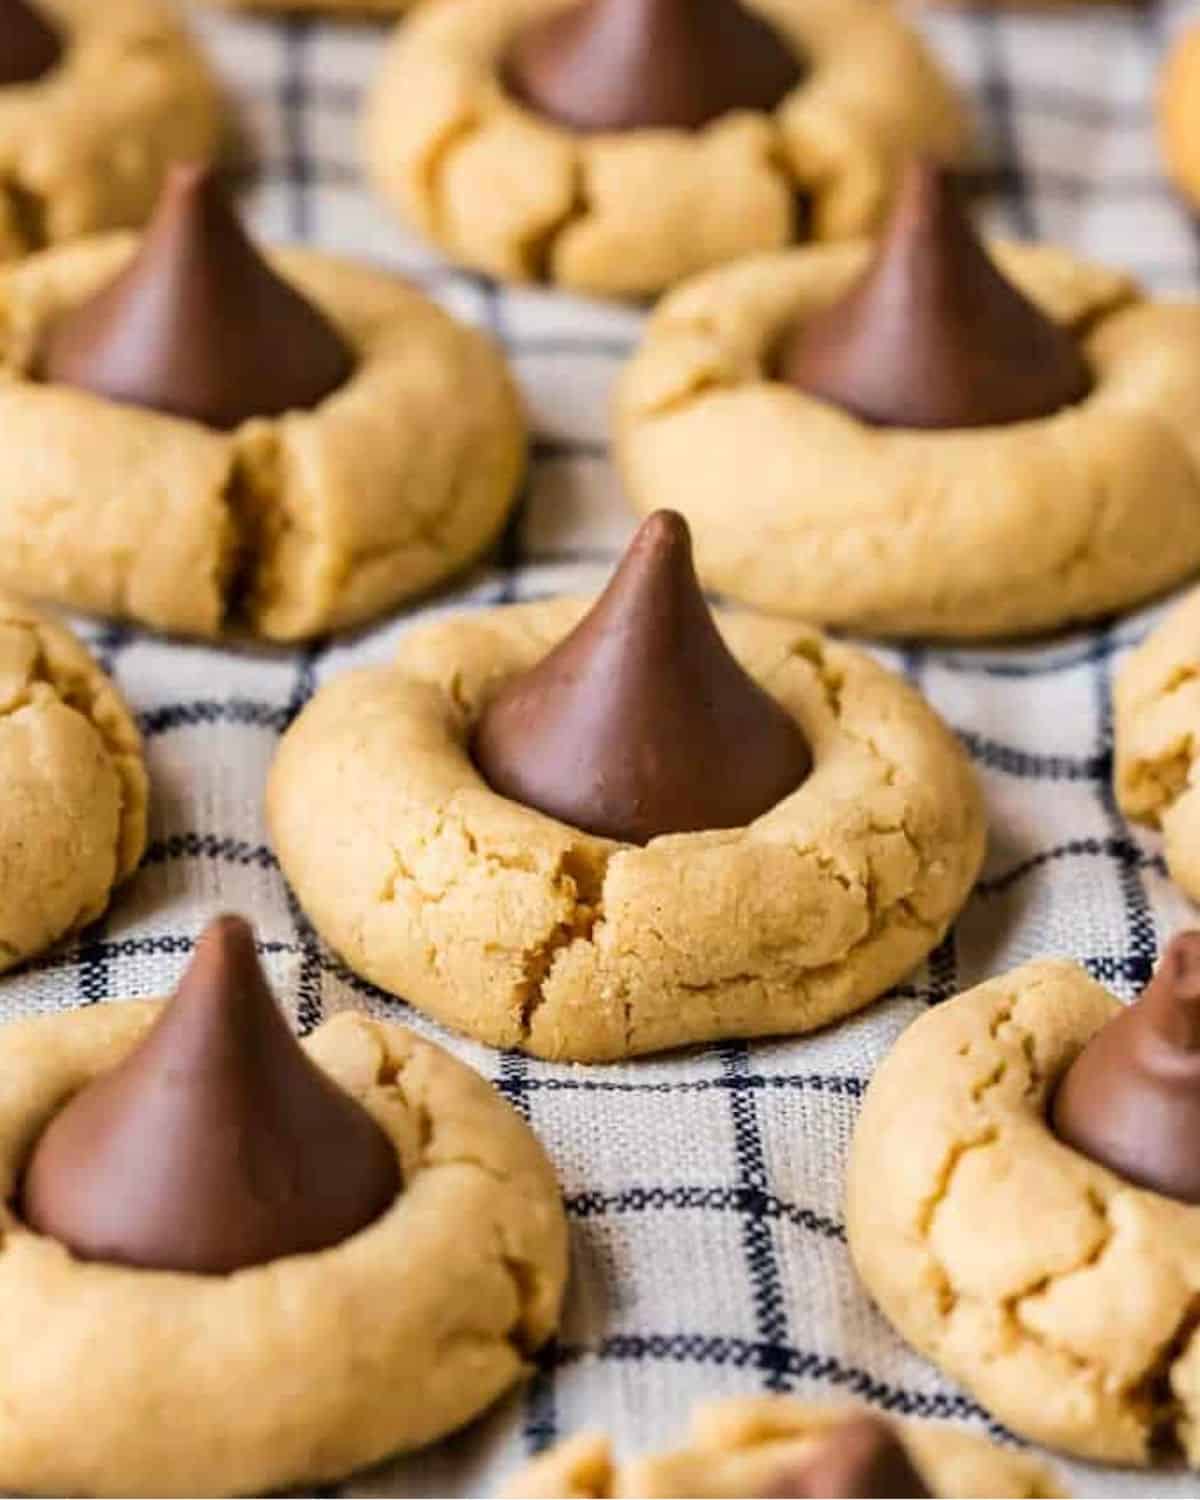 Peanut butter cookies with chocolate kisses, known as hershey kiss cookies or peanut butter kiss cookies, arranged on a baking sheet.